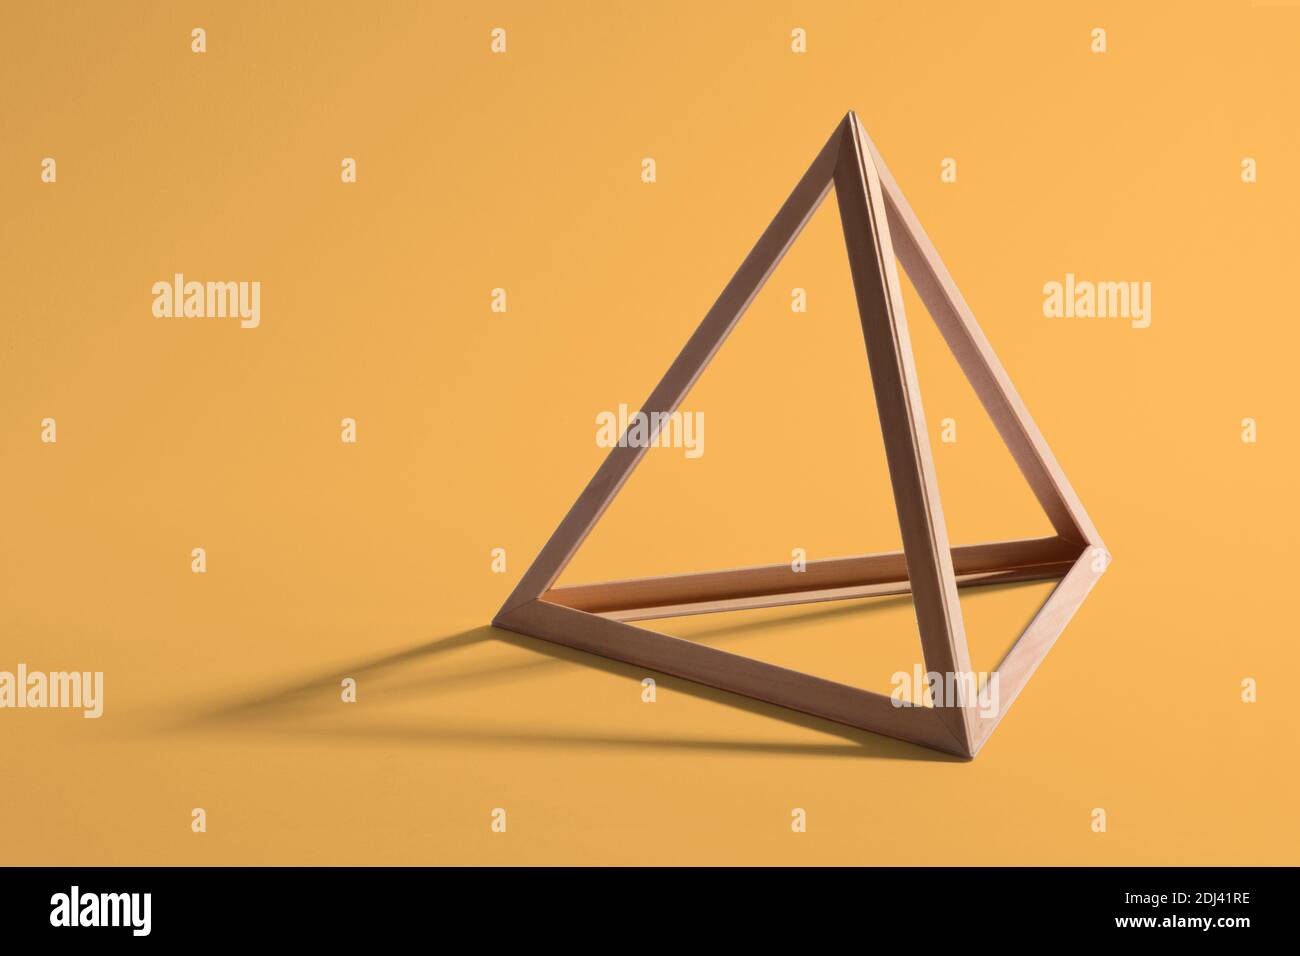 Open empty wooden triangular frame or pyramid shape forming a standard geometric triangle casting a shadow on a yellow background Stock Photo